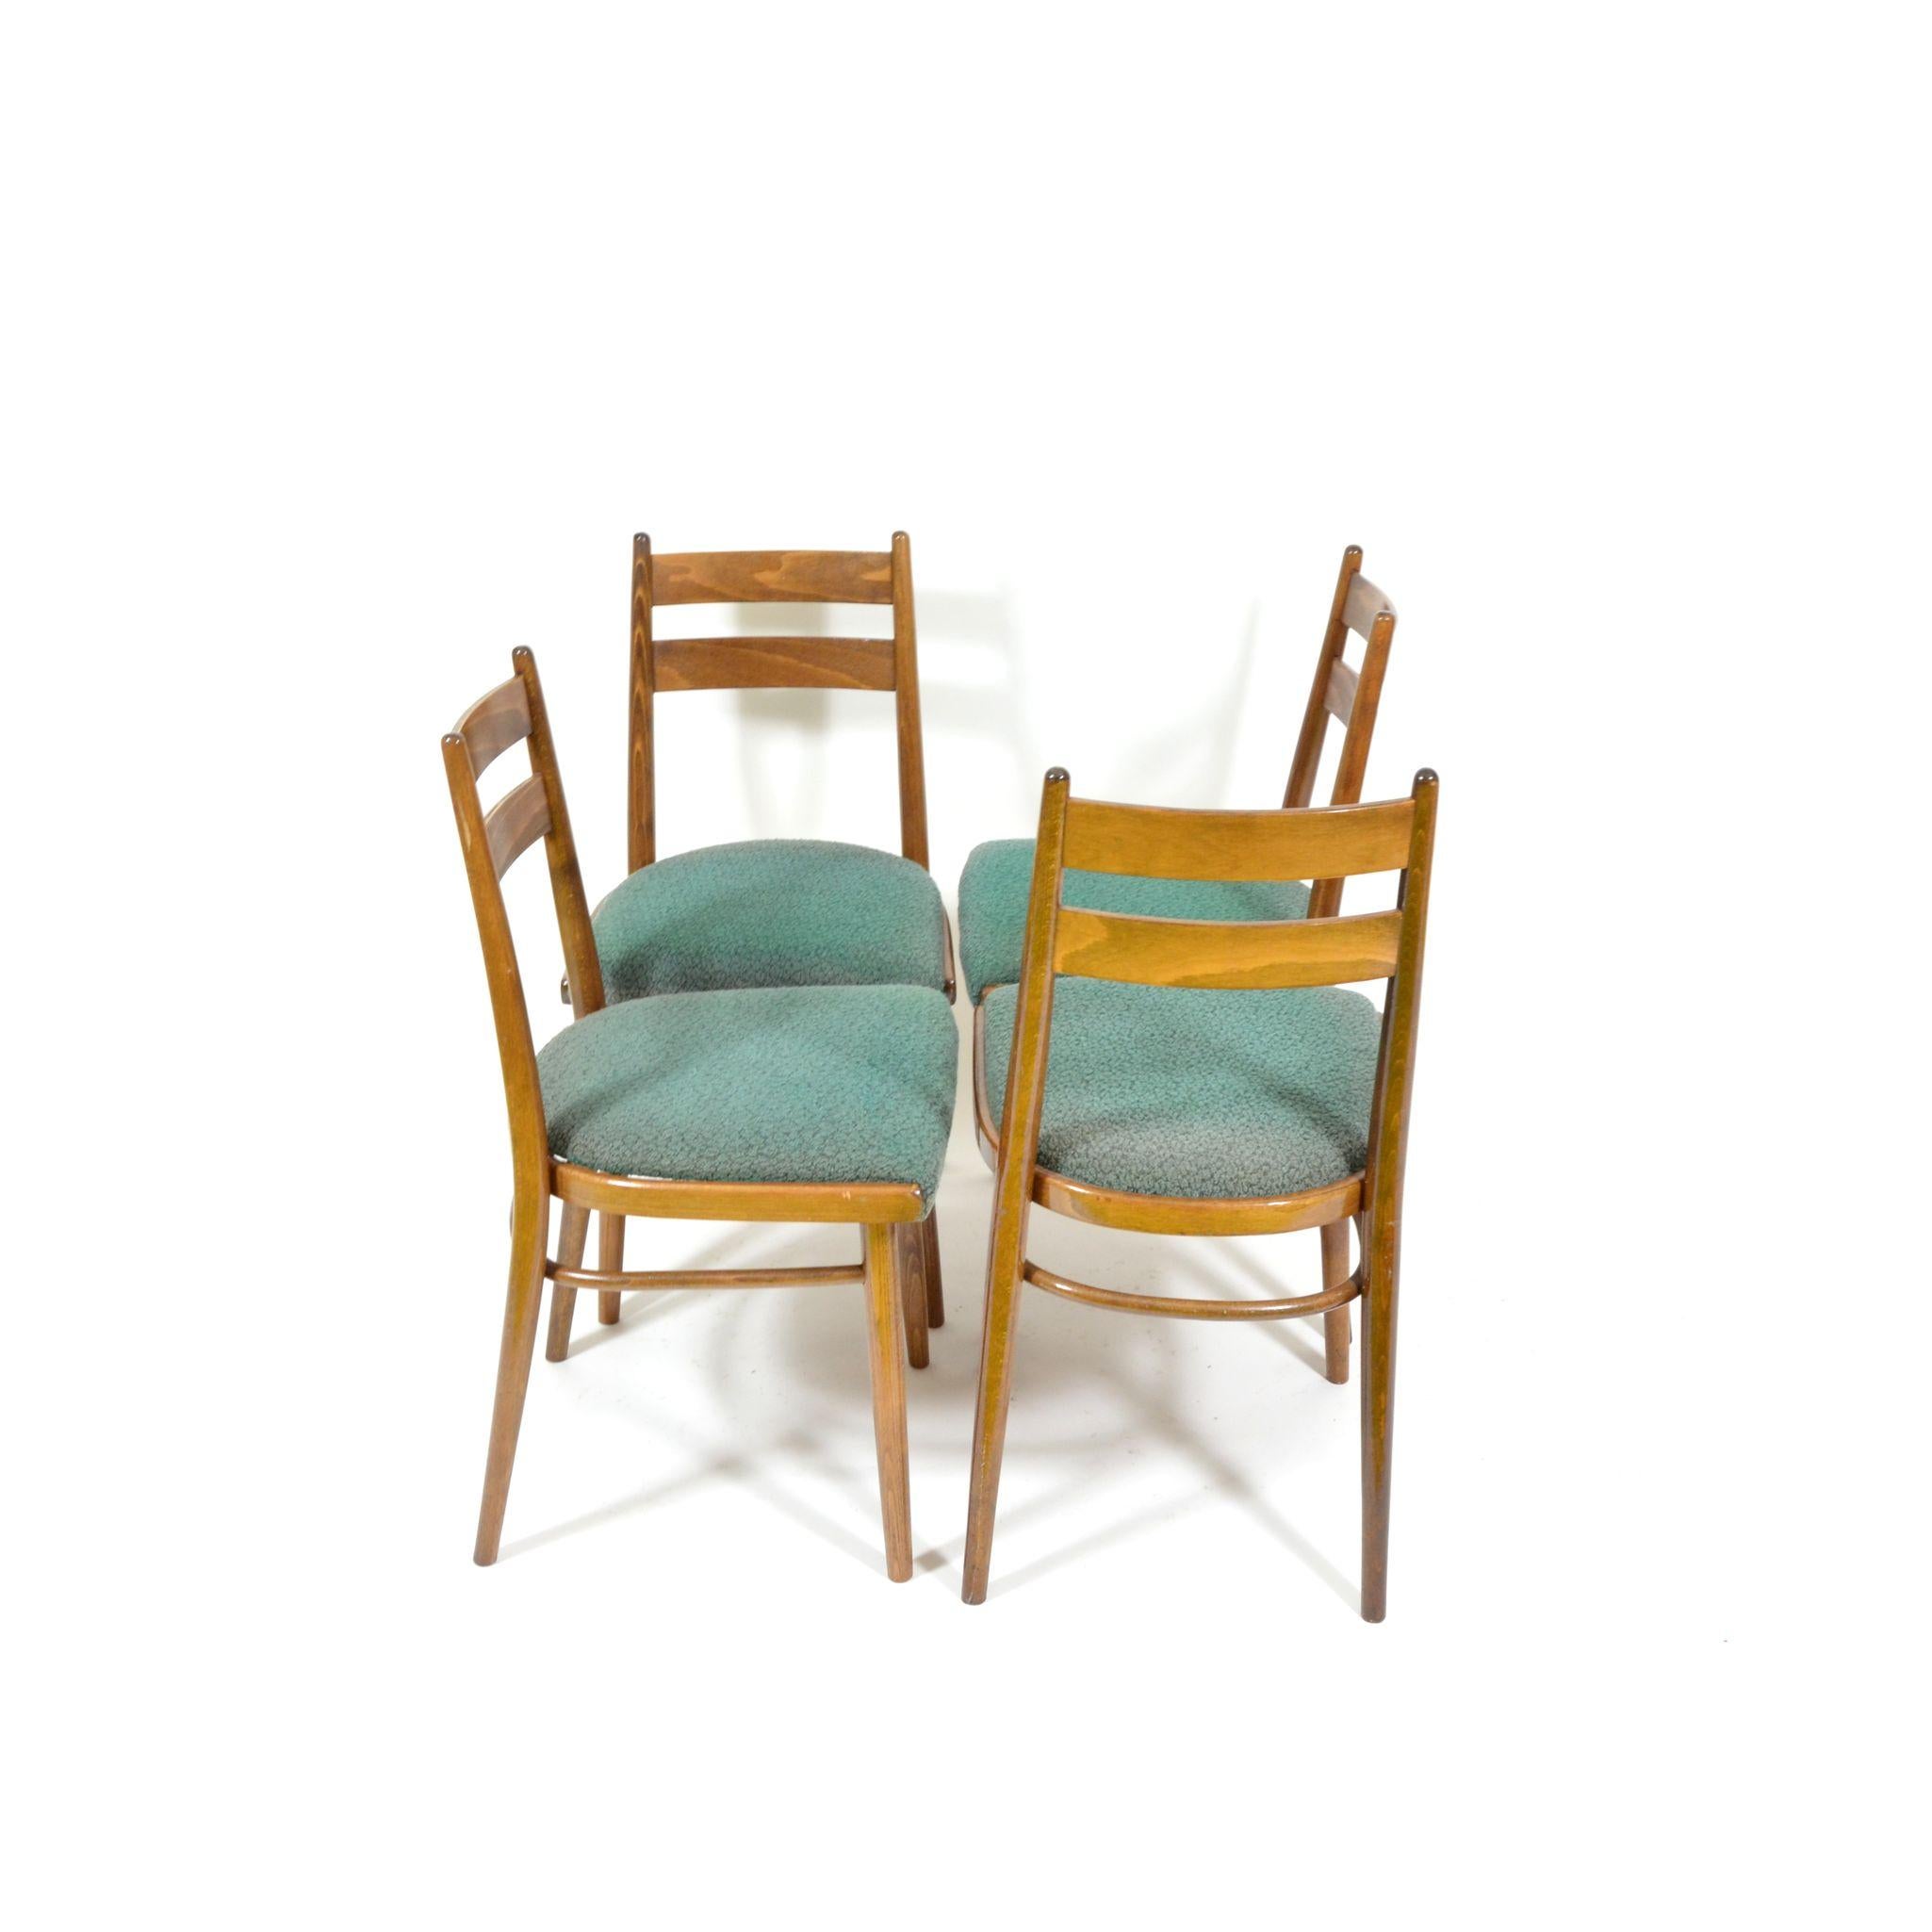 Set of four dining chairs made of beechwood. Wood in very good original condition. Green upholstered seat also in original, condition. Chairs are stabile. Made in Czechoslovakia during 1970s. Second set of four chairs available.